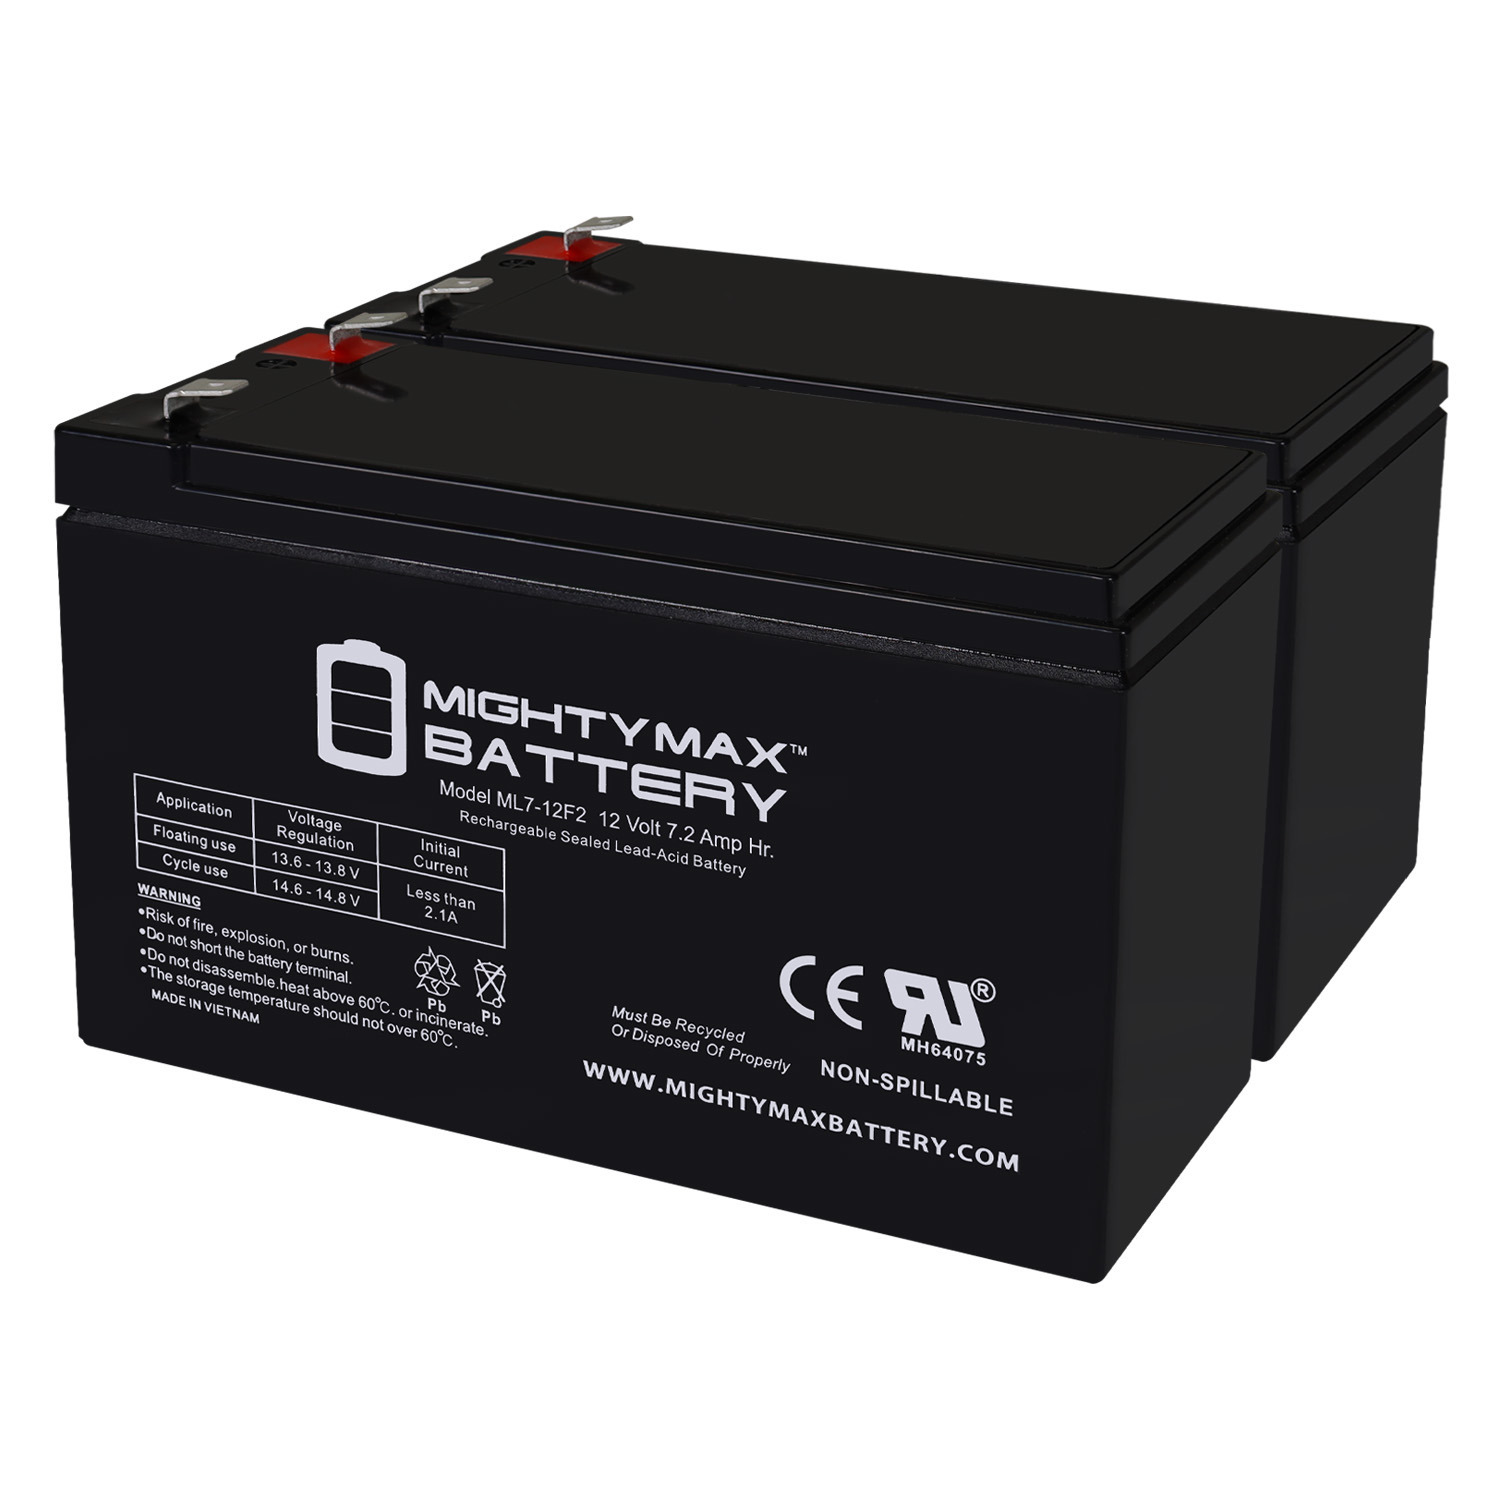 Mighty Max Battery ML7-12F2 - 12 Volt 7 AH, F2 Terminal, Rechargeable SLA AGM Battery - Pack of 2